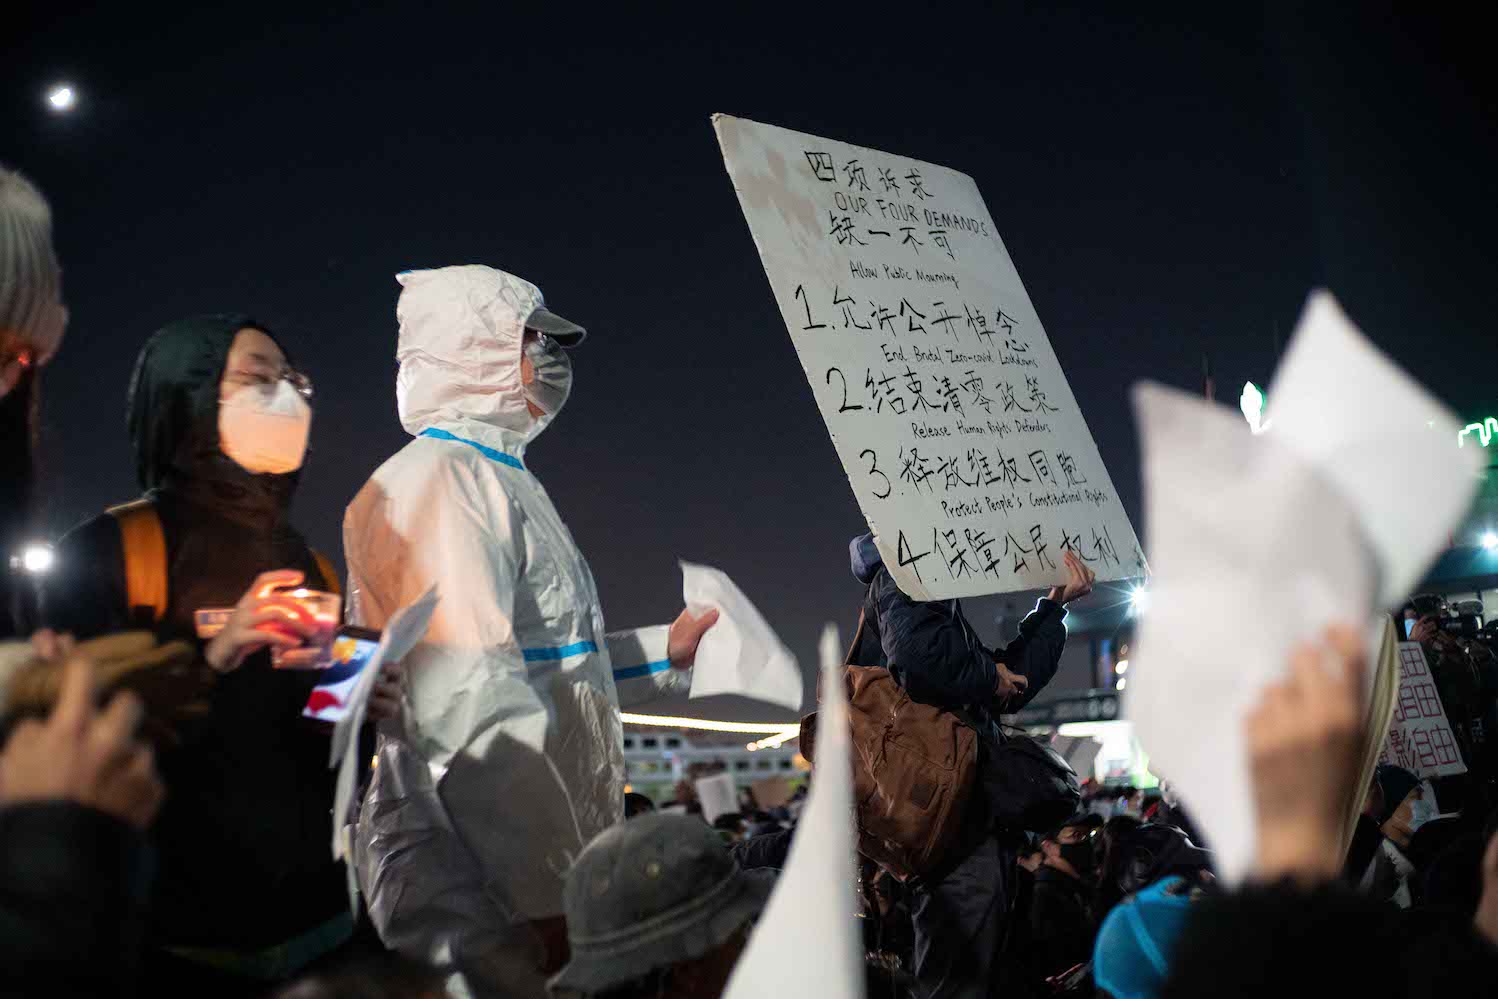 A group of protesters hold signs at night that translate to “Our Four Demands, not one can be missed.” A protester is dressed in a white medical suit used by medical professionals during P.C.R. tests.